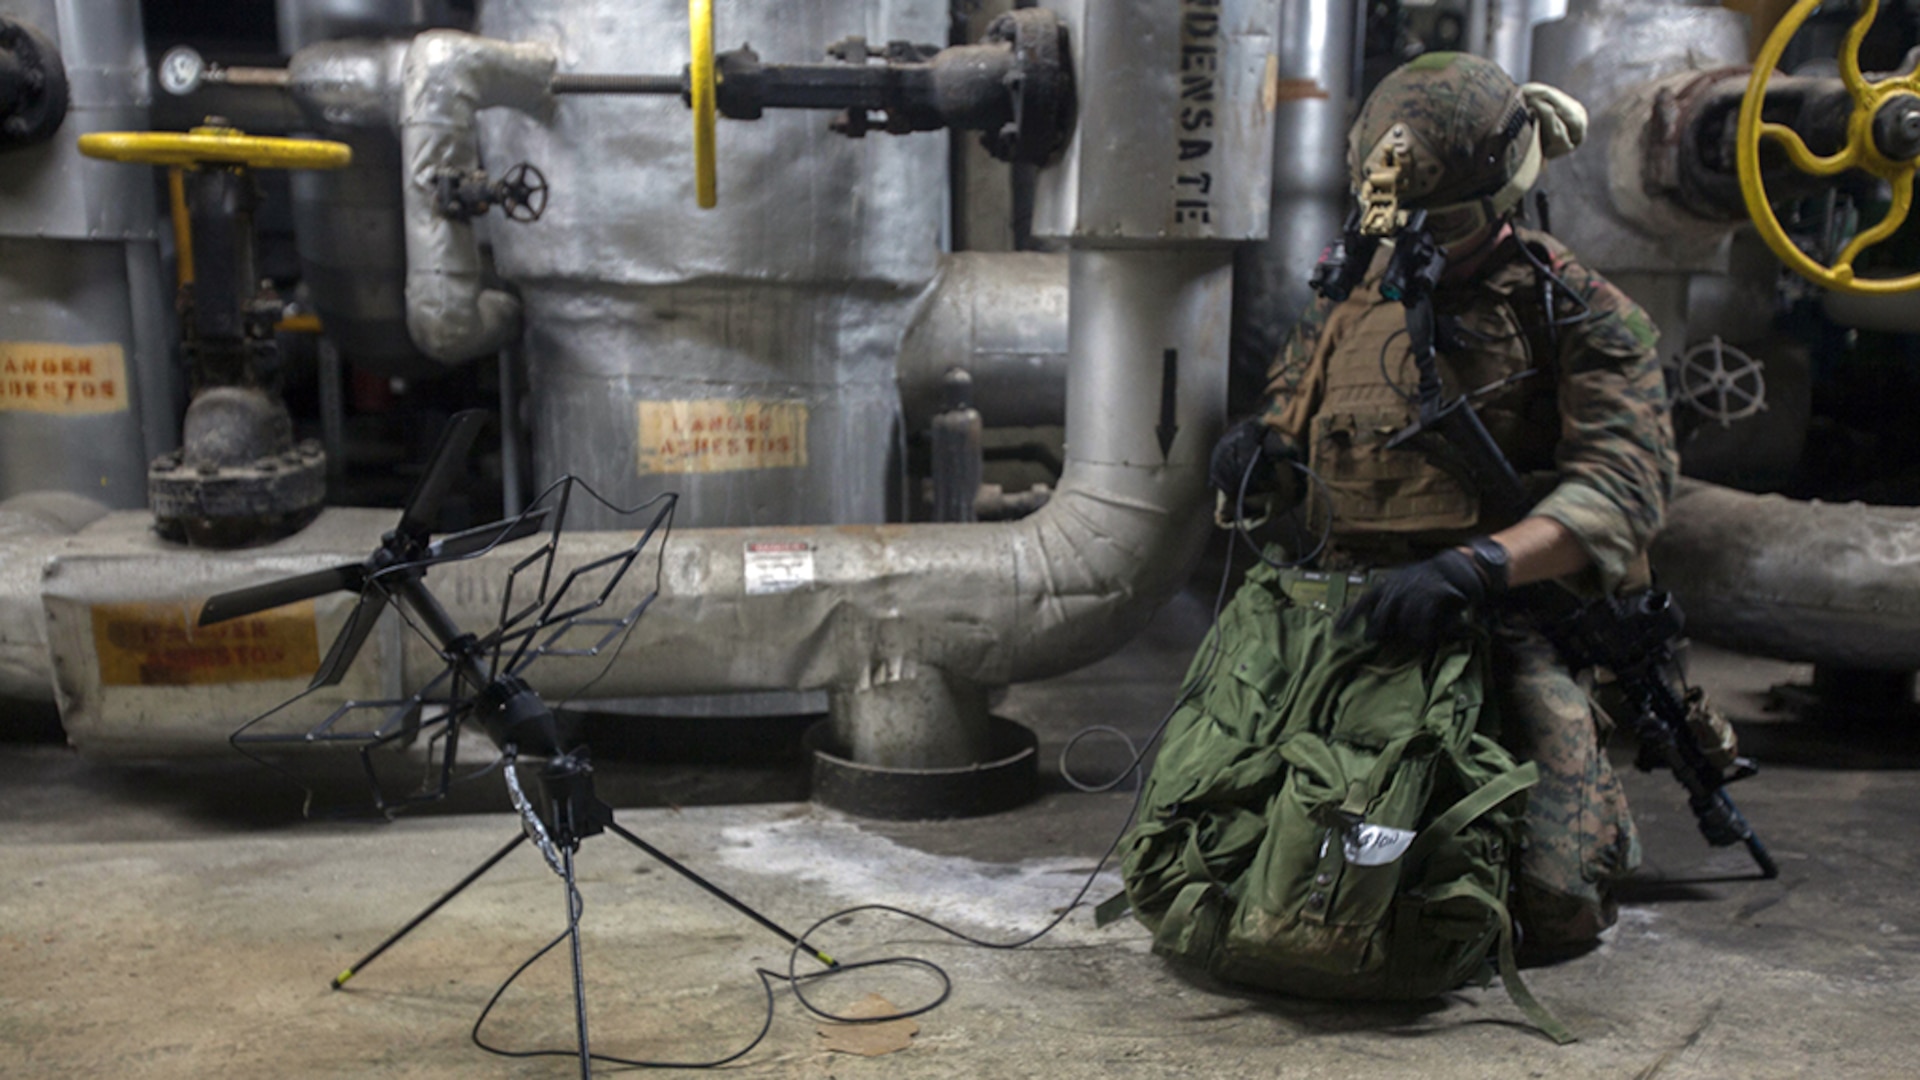 Staff Sgt. Travis Caron sets up satellite communications during a raid Jan. 13, 2015, as part of Realistic Urban Training Exercise on Guam. RUTEX is a high-intensity close-quarter battle training exercise conducted in an actual urban environment to provide a high degree of realism to the training. The exercise is part of the Maritime Raid Force’s pre-deployment training before their upcoming deployment with the 31st MEU. Caron, from Sneads Ferry, North Carolina, is the Force Reconnaissance Platoon communications chief with MRF, 31st MEU. 